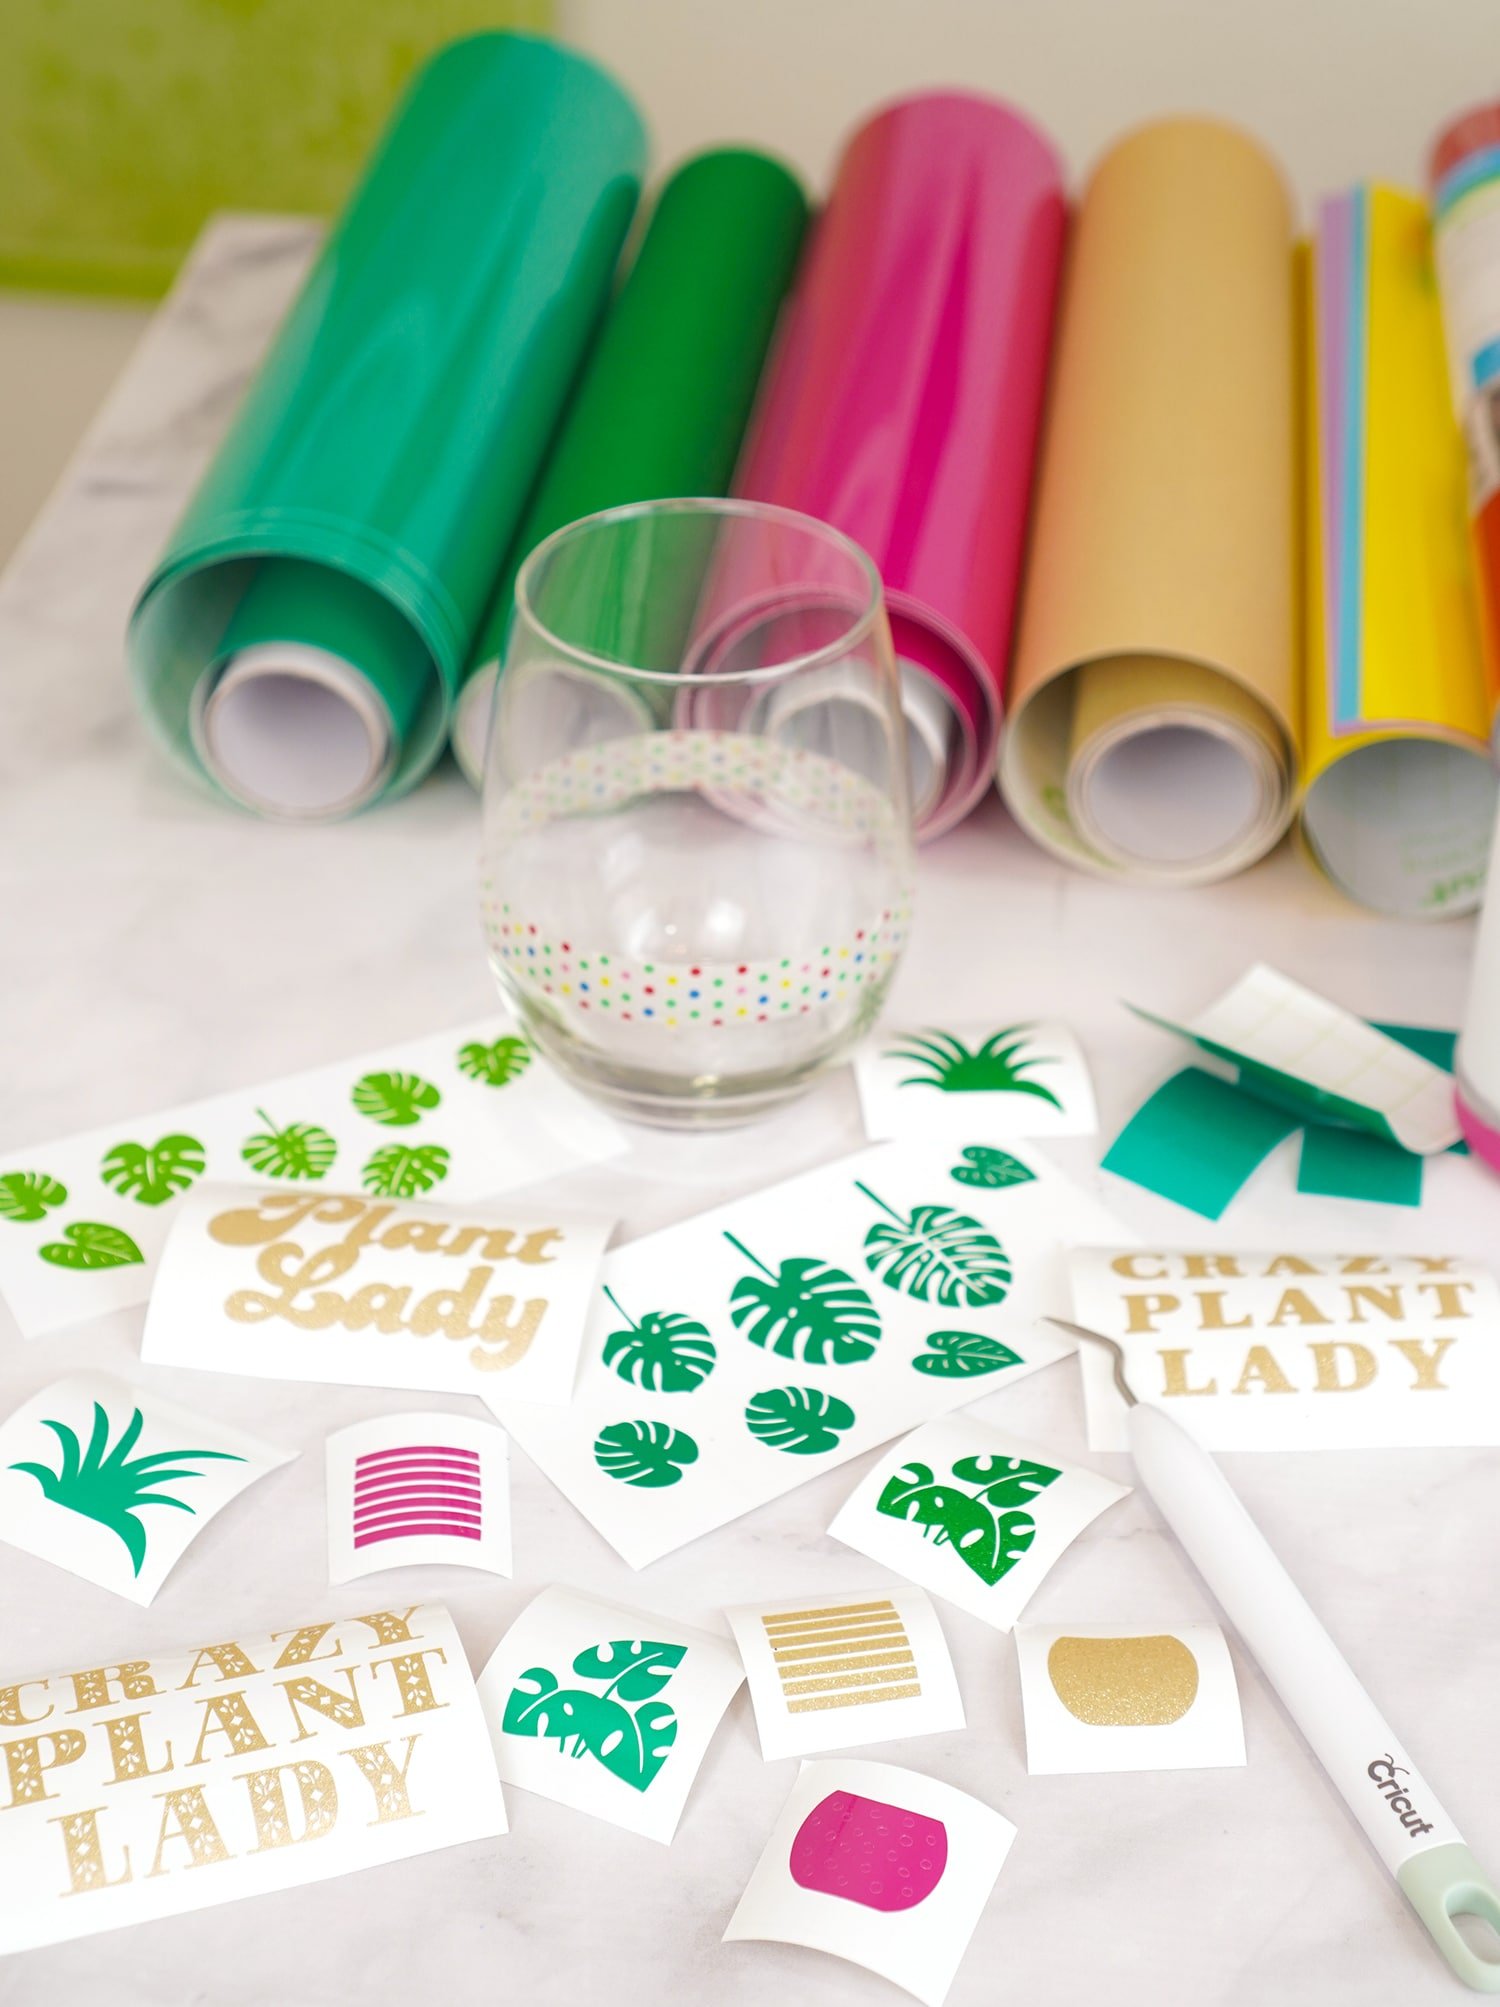 Weeded vinyl decals with weeding tool, vinyl rolls, and stemless wine glass